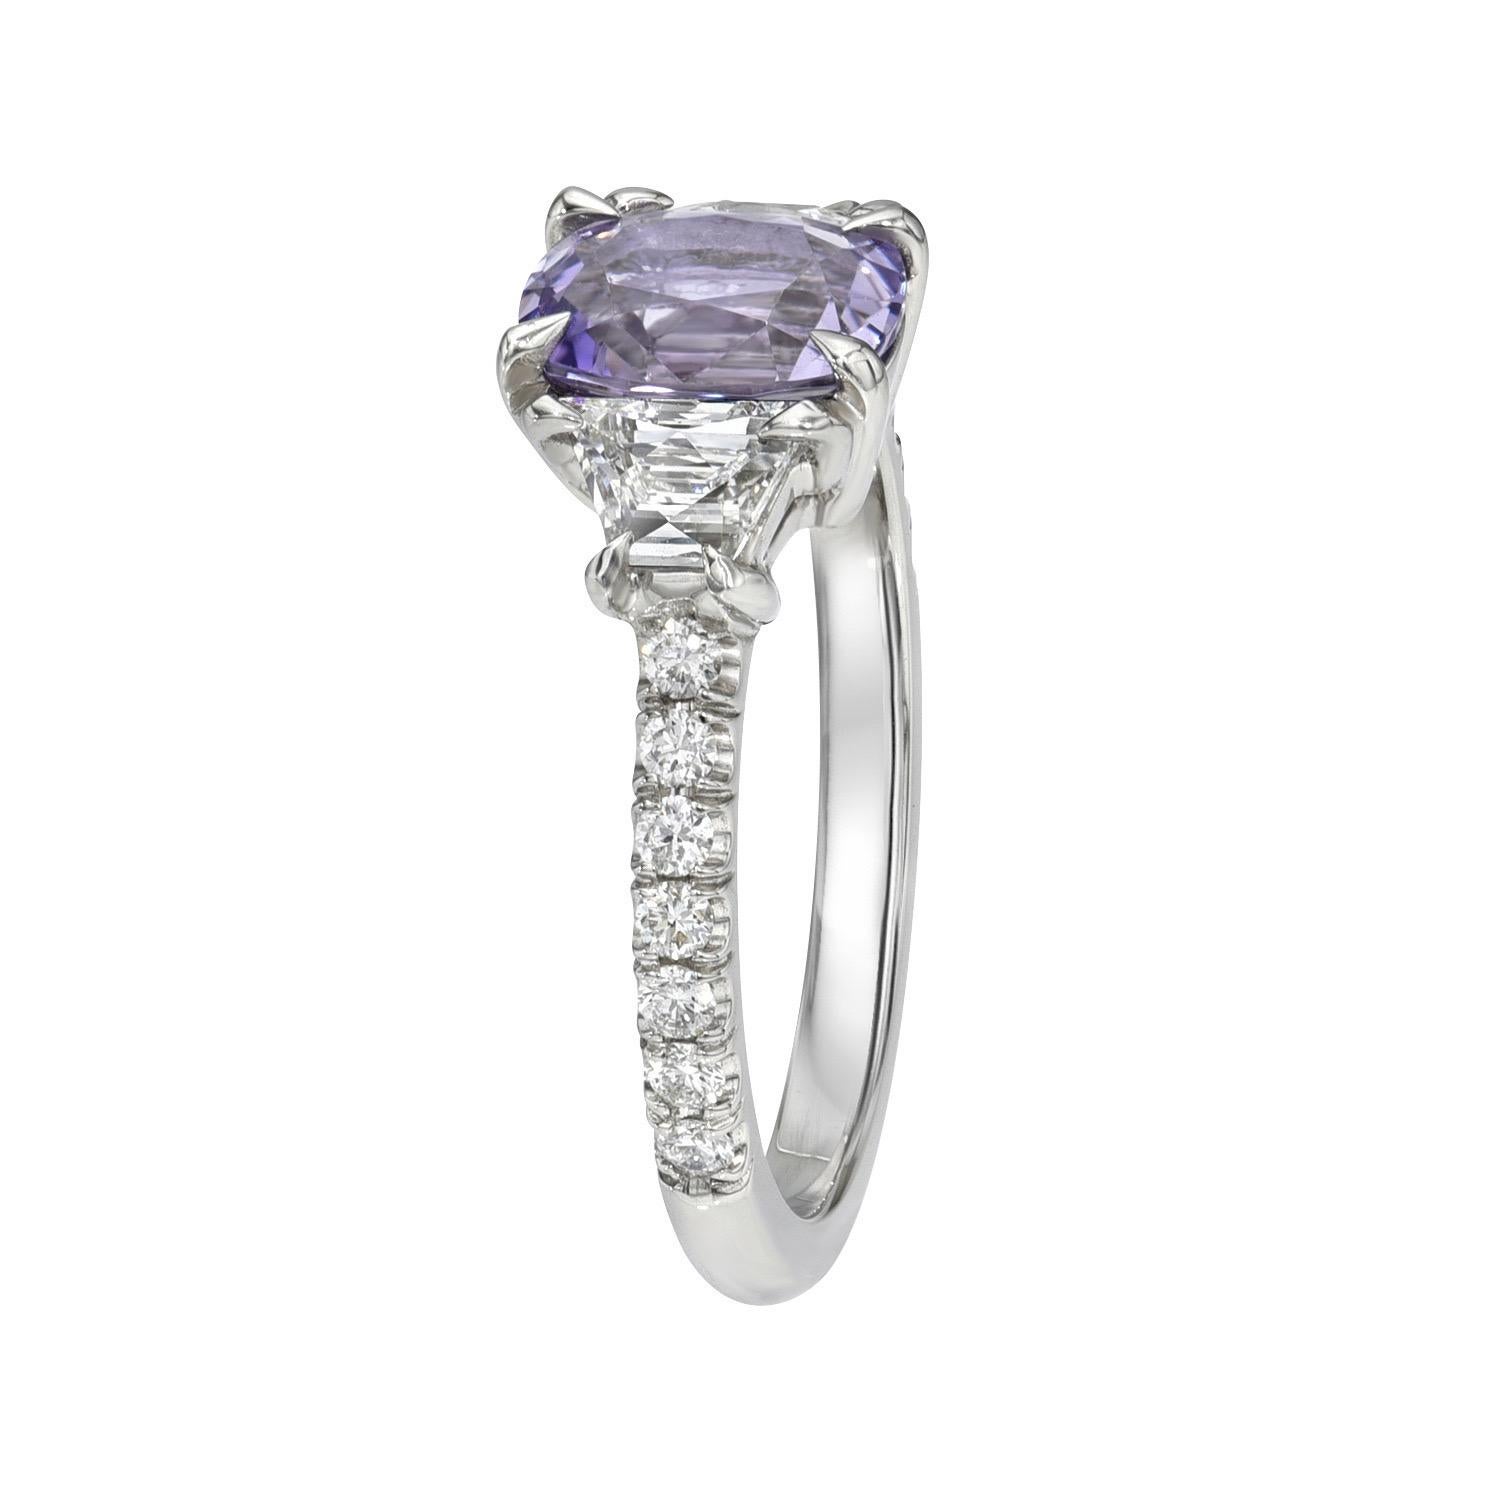 Very attractive 1.41 carat unheated Lavender Sapphire cushion, three stone platinum ring, decorated with a pair of 0.45 carats, E color/VS2-SI1 clarity, French cut trapezoid diamonds, and a total of 0.20 carats round brilliant diamonds.
Size 6.